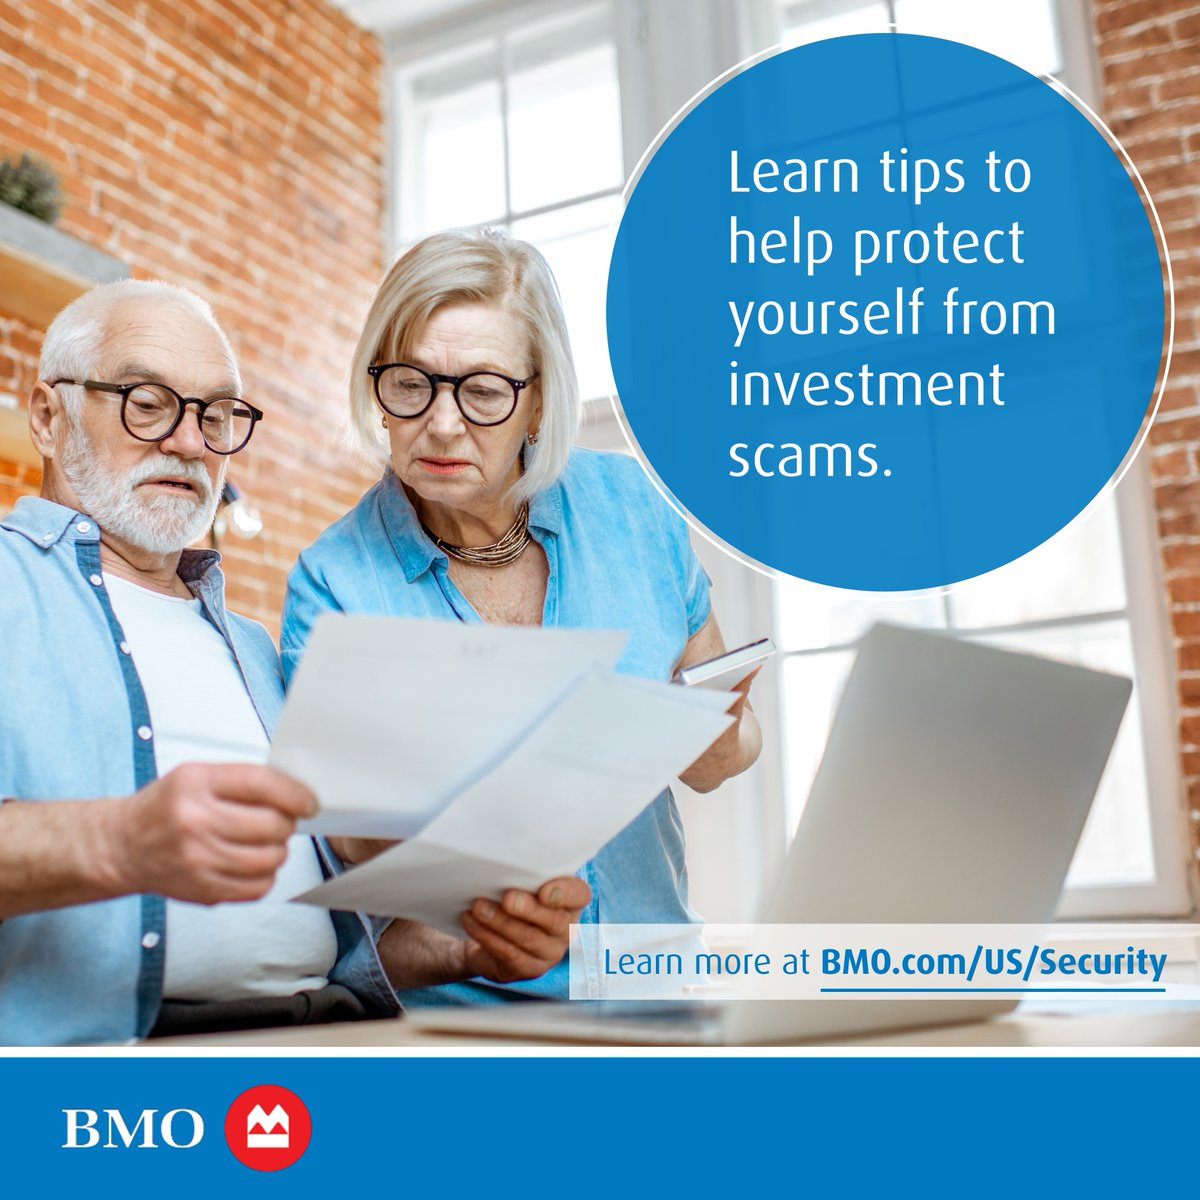 Received a financial investment opportunity that looks too good to be true? It probably is. Review what to look out for and how you can protect yourself from investment scams. spr.ly/6016jMxQi